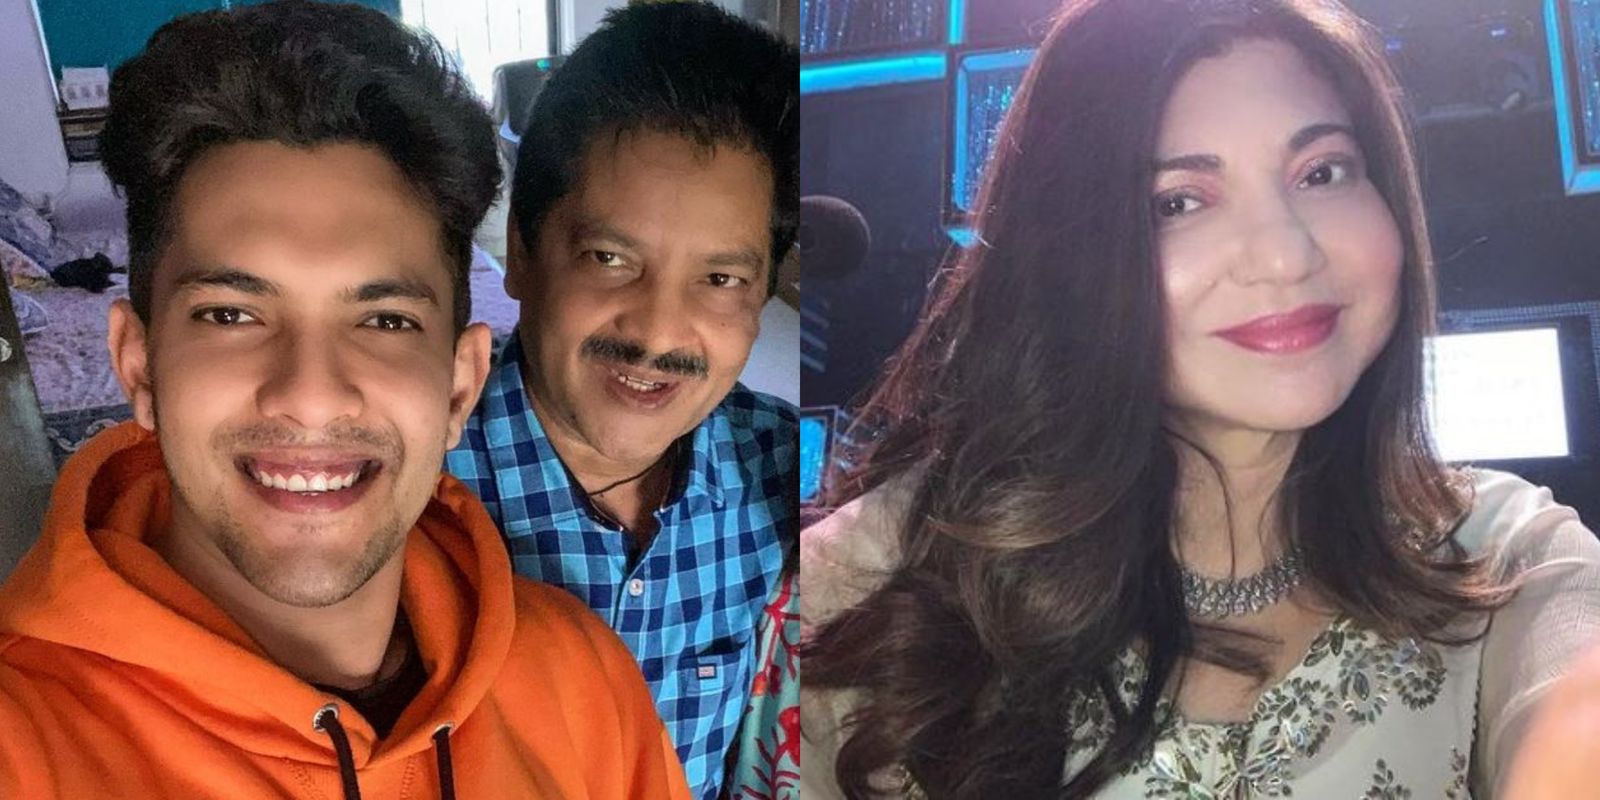 Aditya Narayan Reveals He Flirted With Alka Yagnik On Reality Show Once Which Miffed His Father Udit Narayan; Here's Why